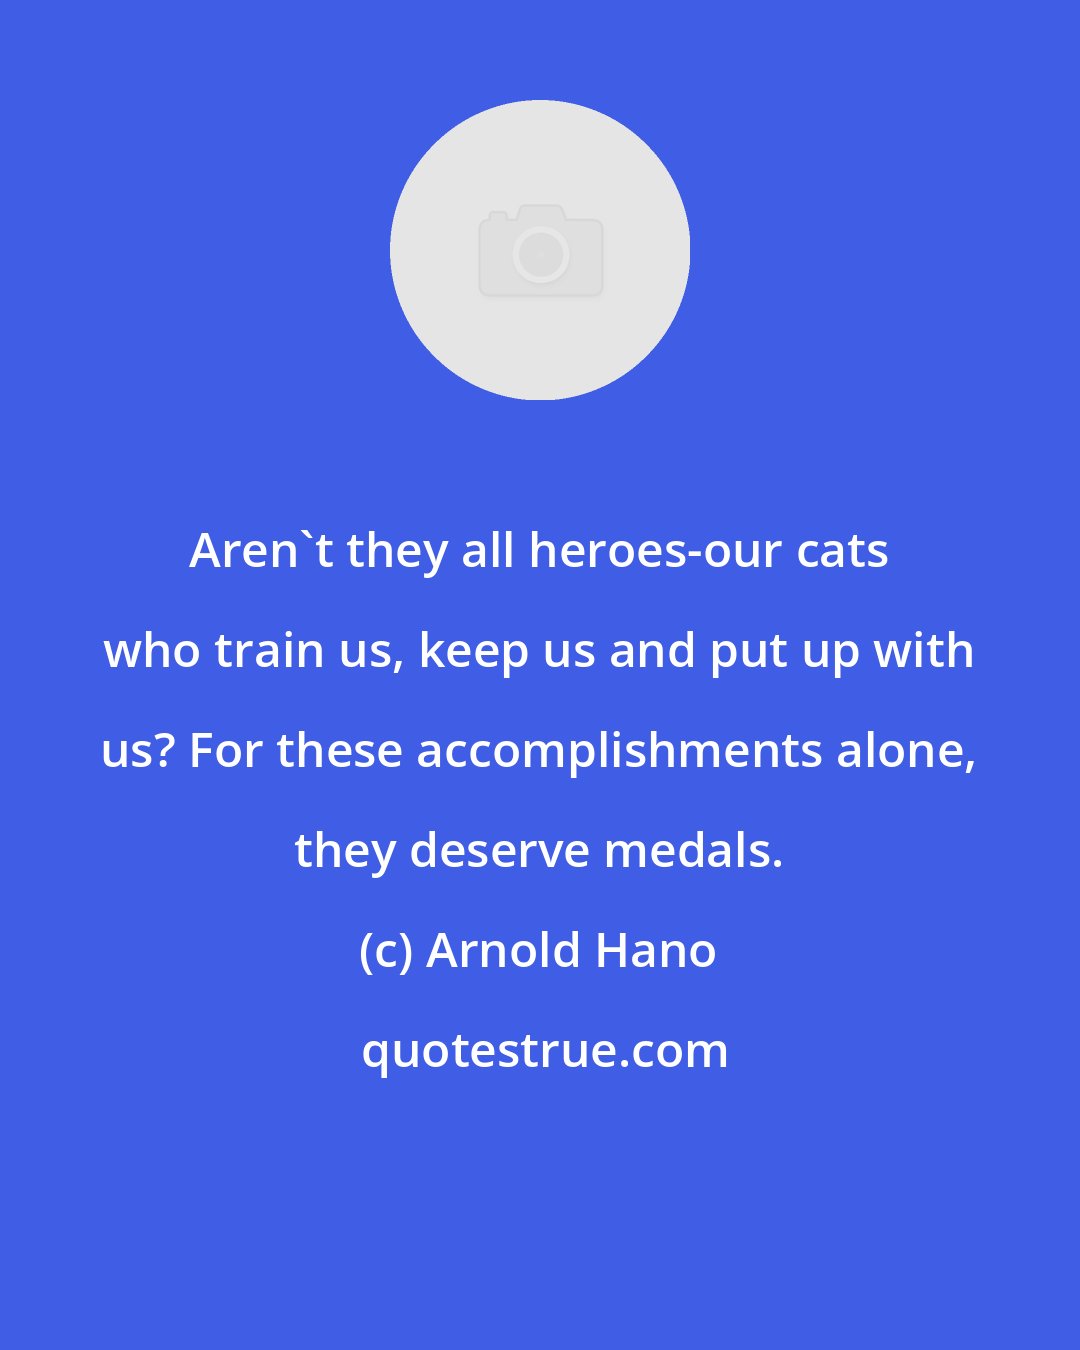 Arnold Hano: Aren't they all heroes-our cats who train us, keep us and put up with us? For these accomplishments alone, they deserve medals.